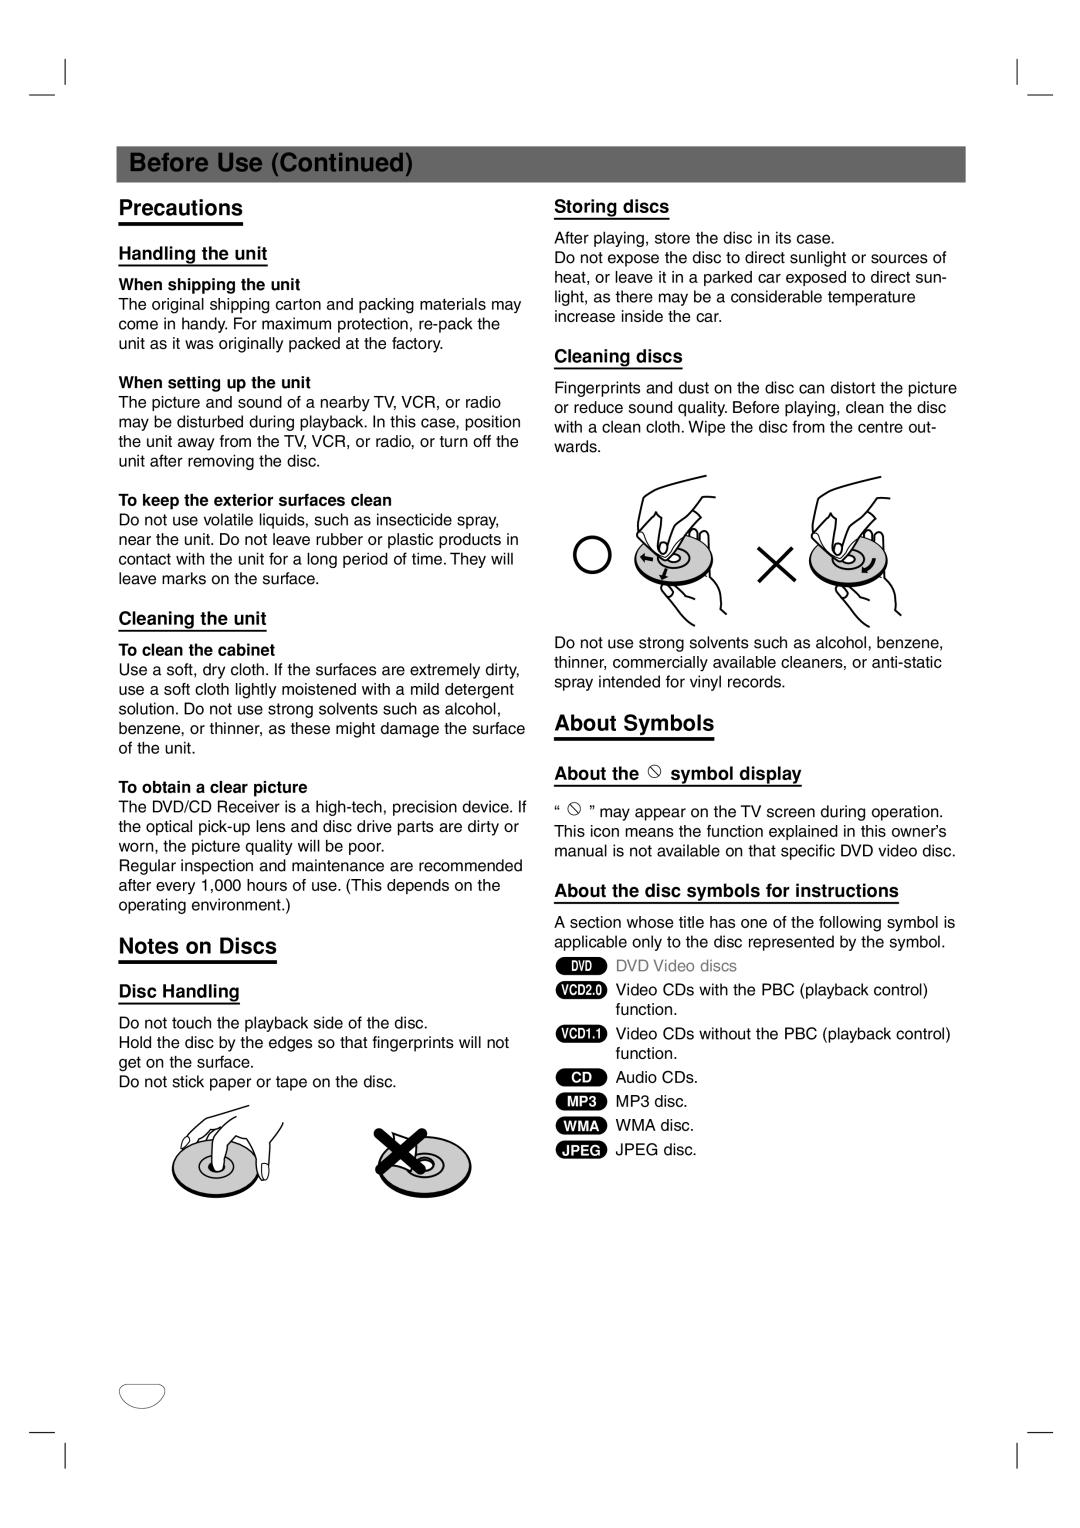 Toshiba SD-44HKSE owner manual Precautions, About Symbols 